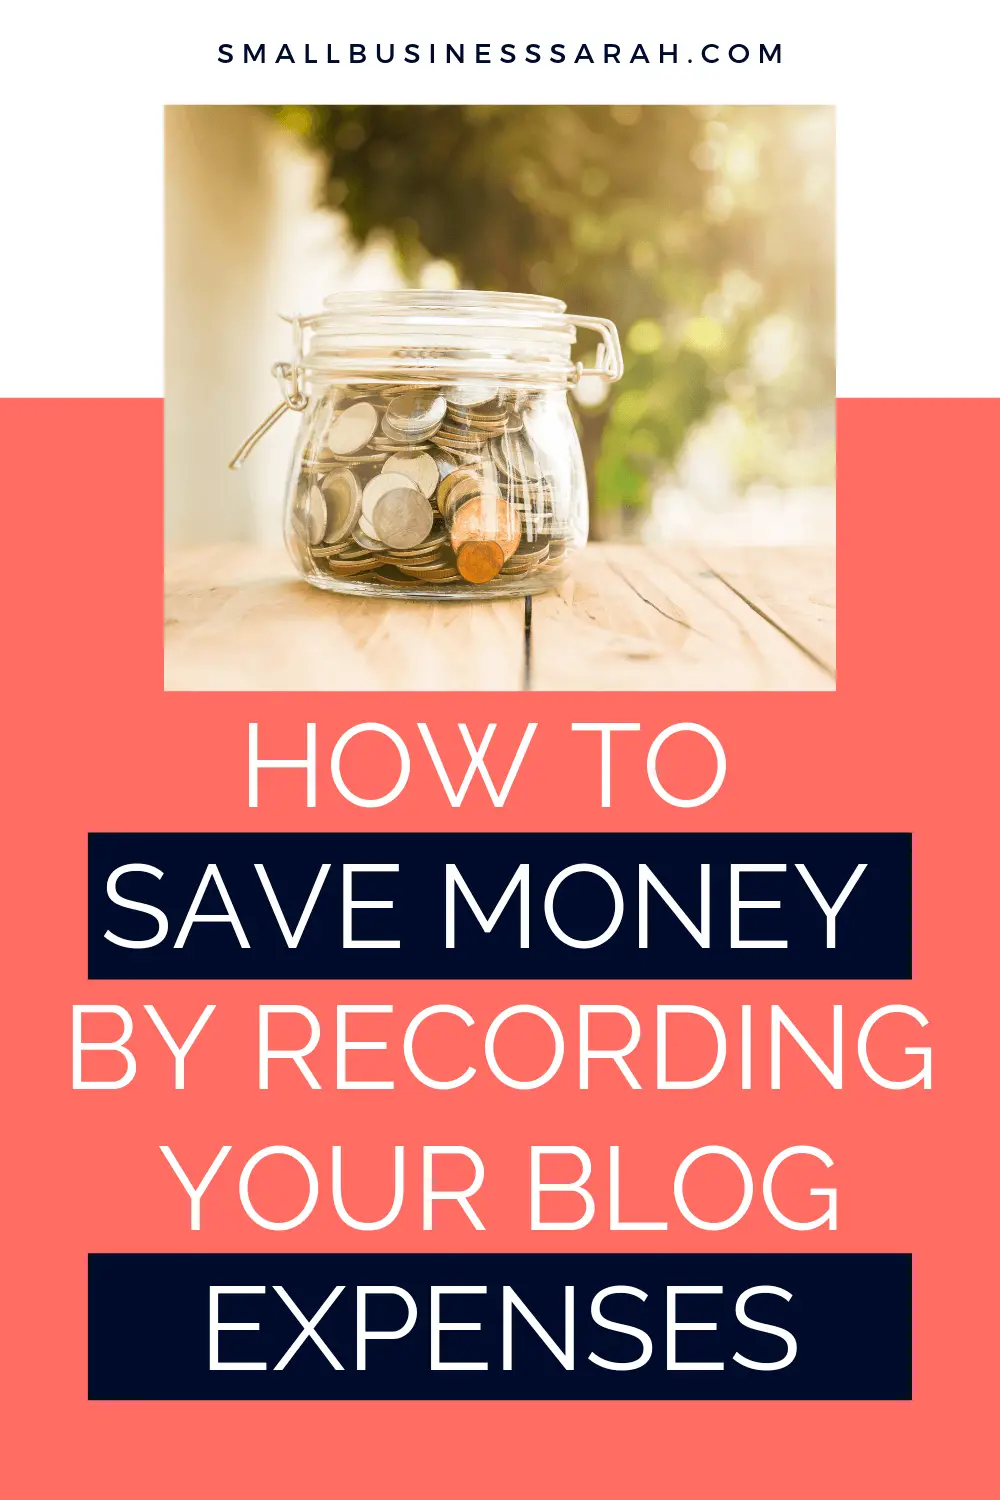 How to Save Money By Recording Your Blog Expenses